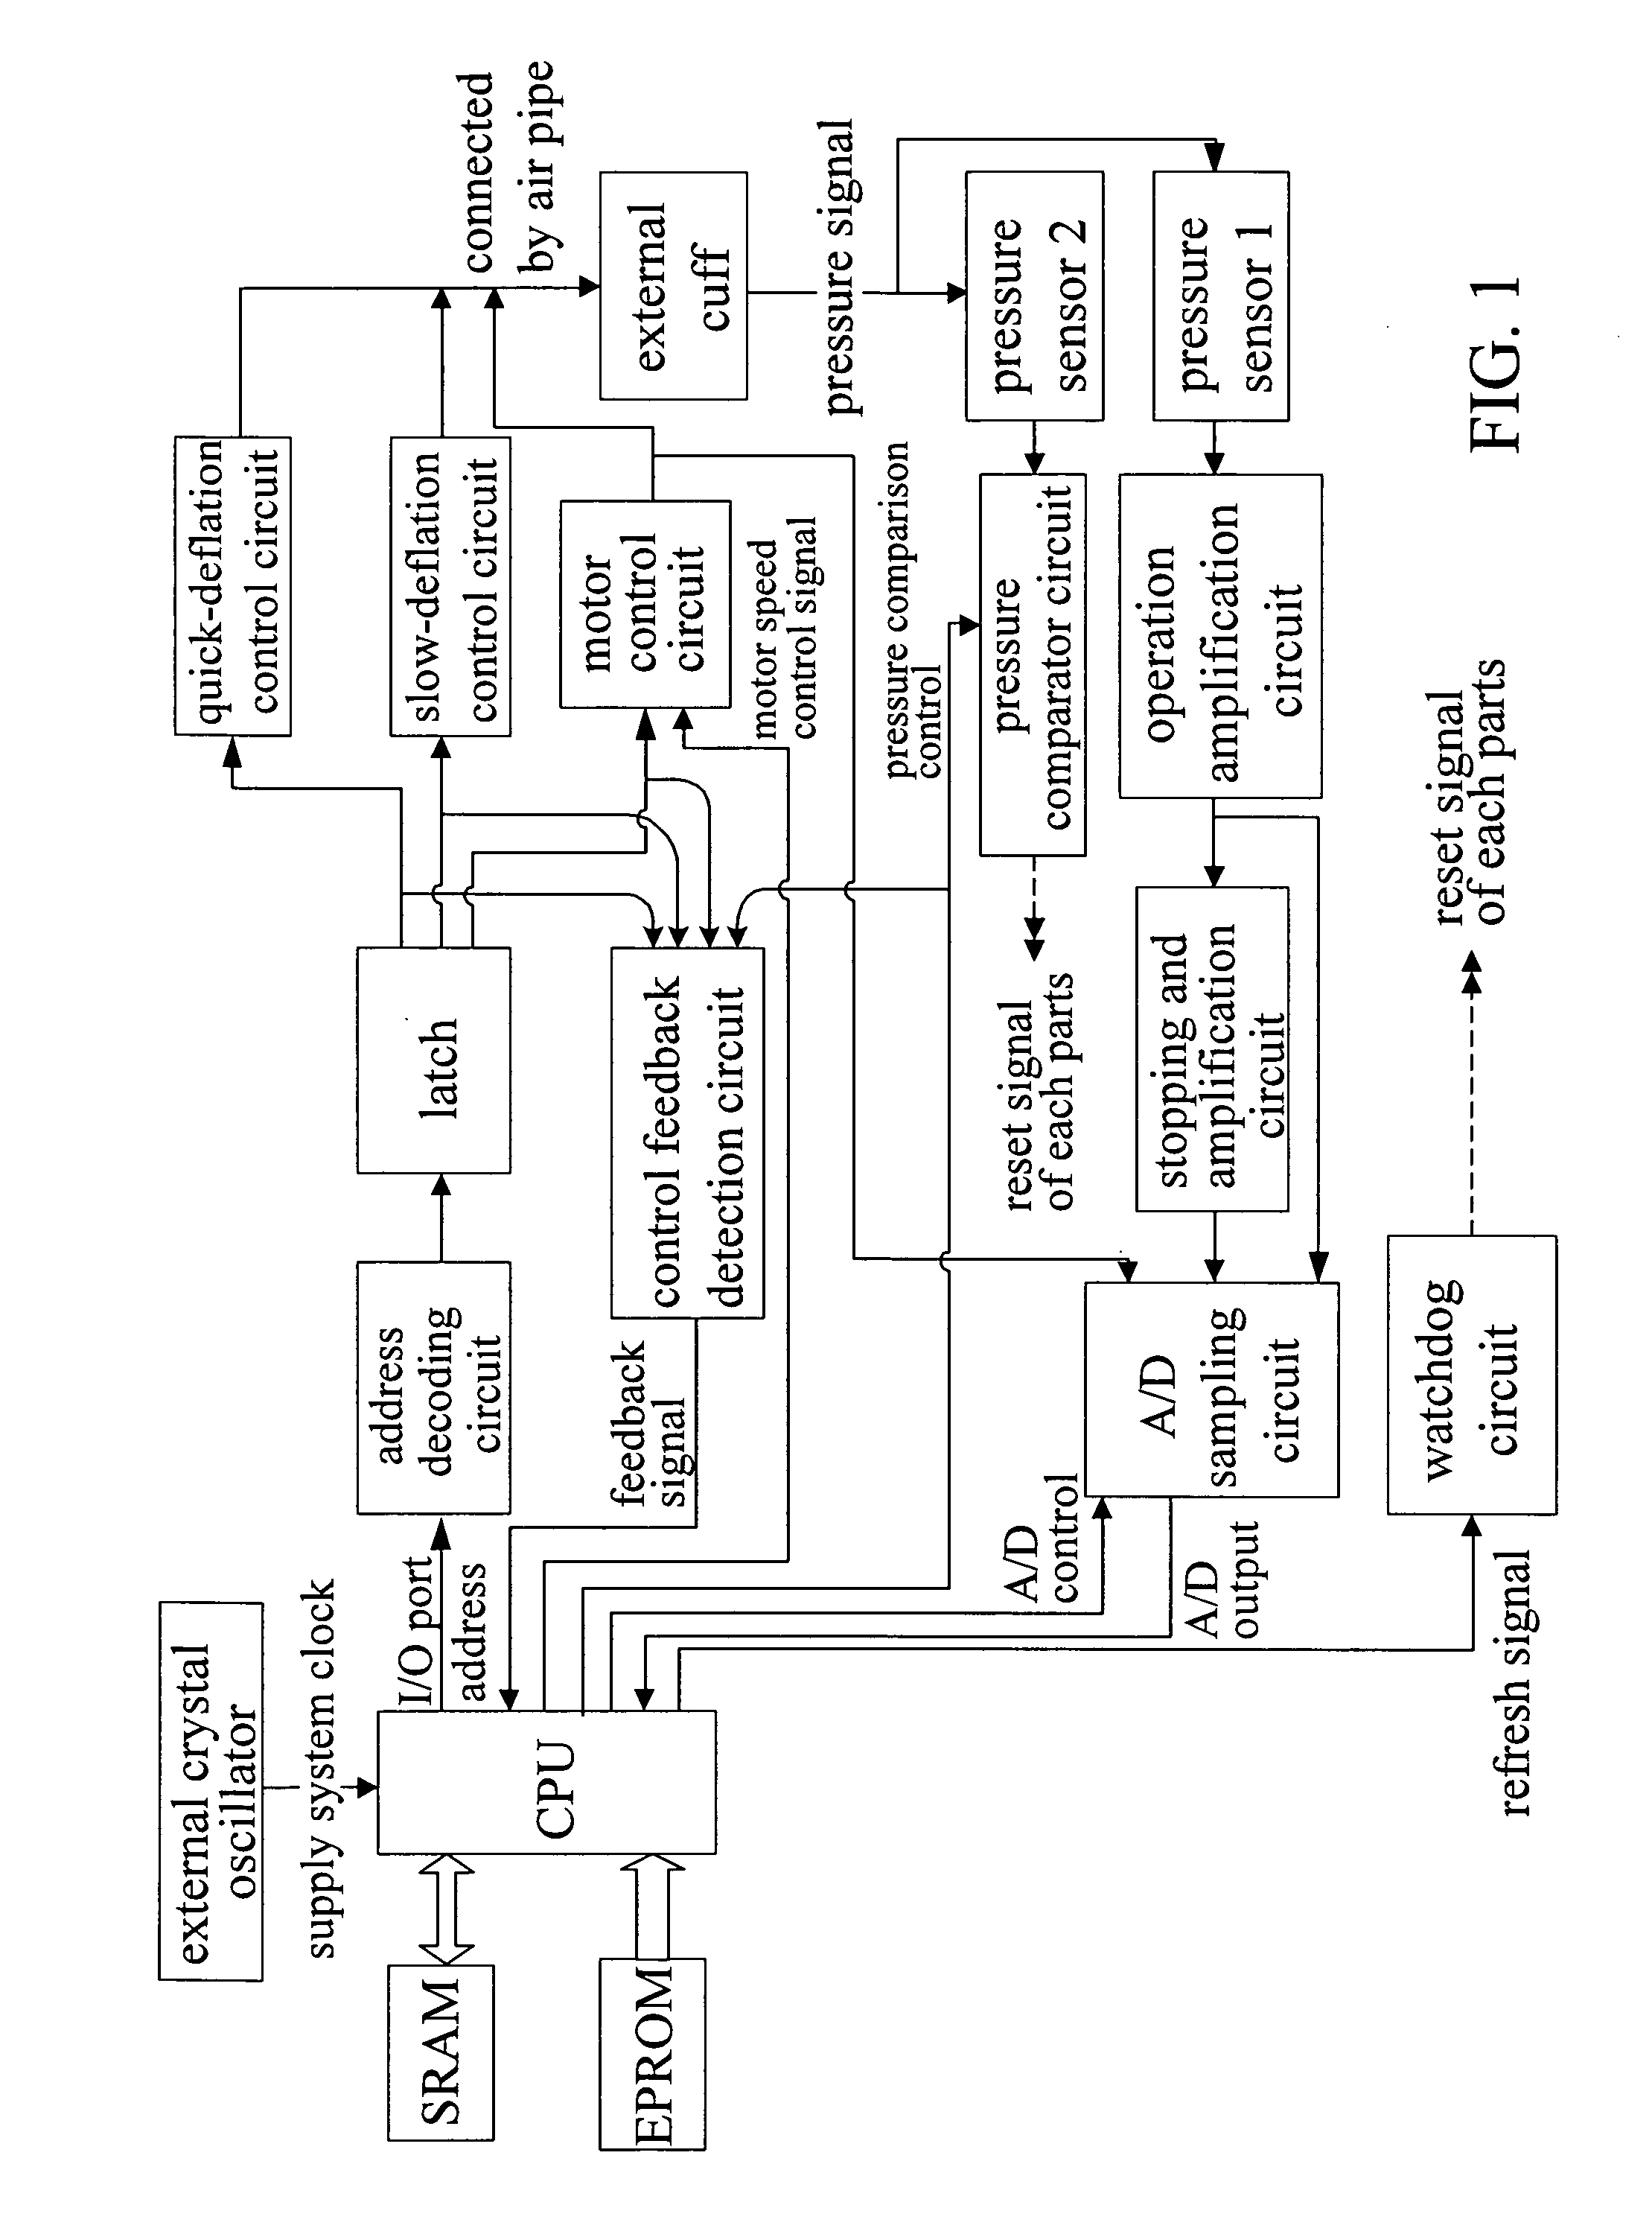 Method and apparatus for calculating blood pressure with signal transformation